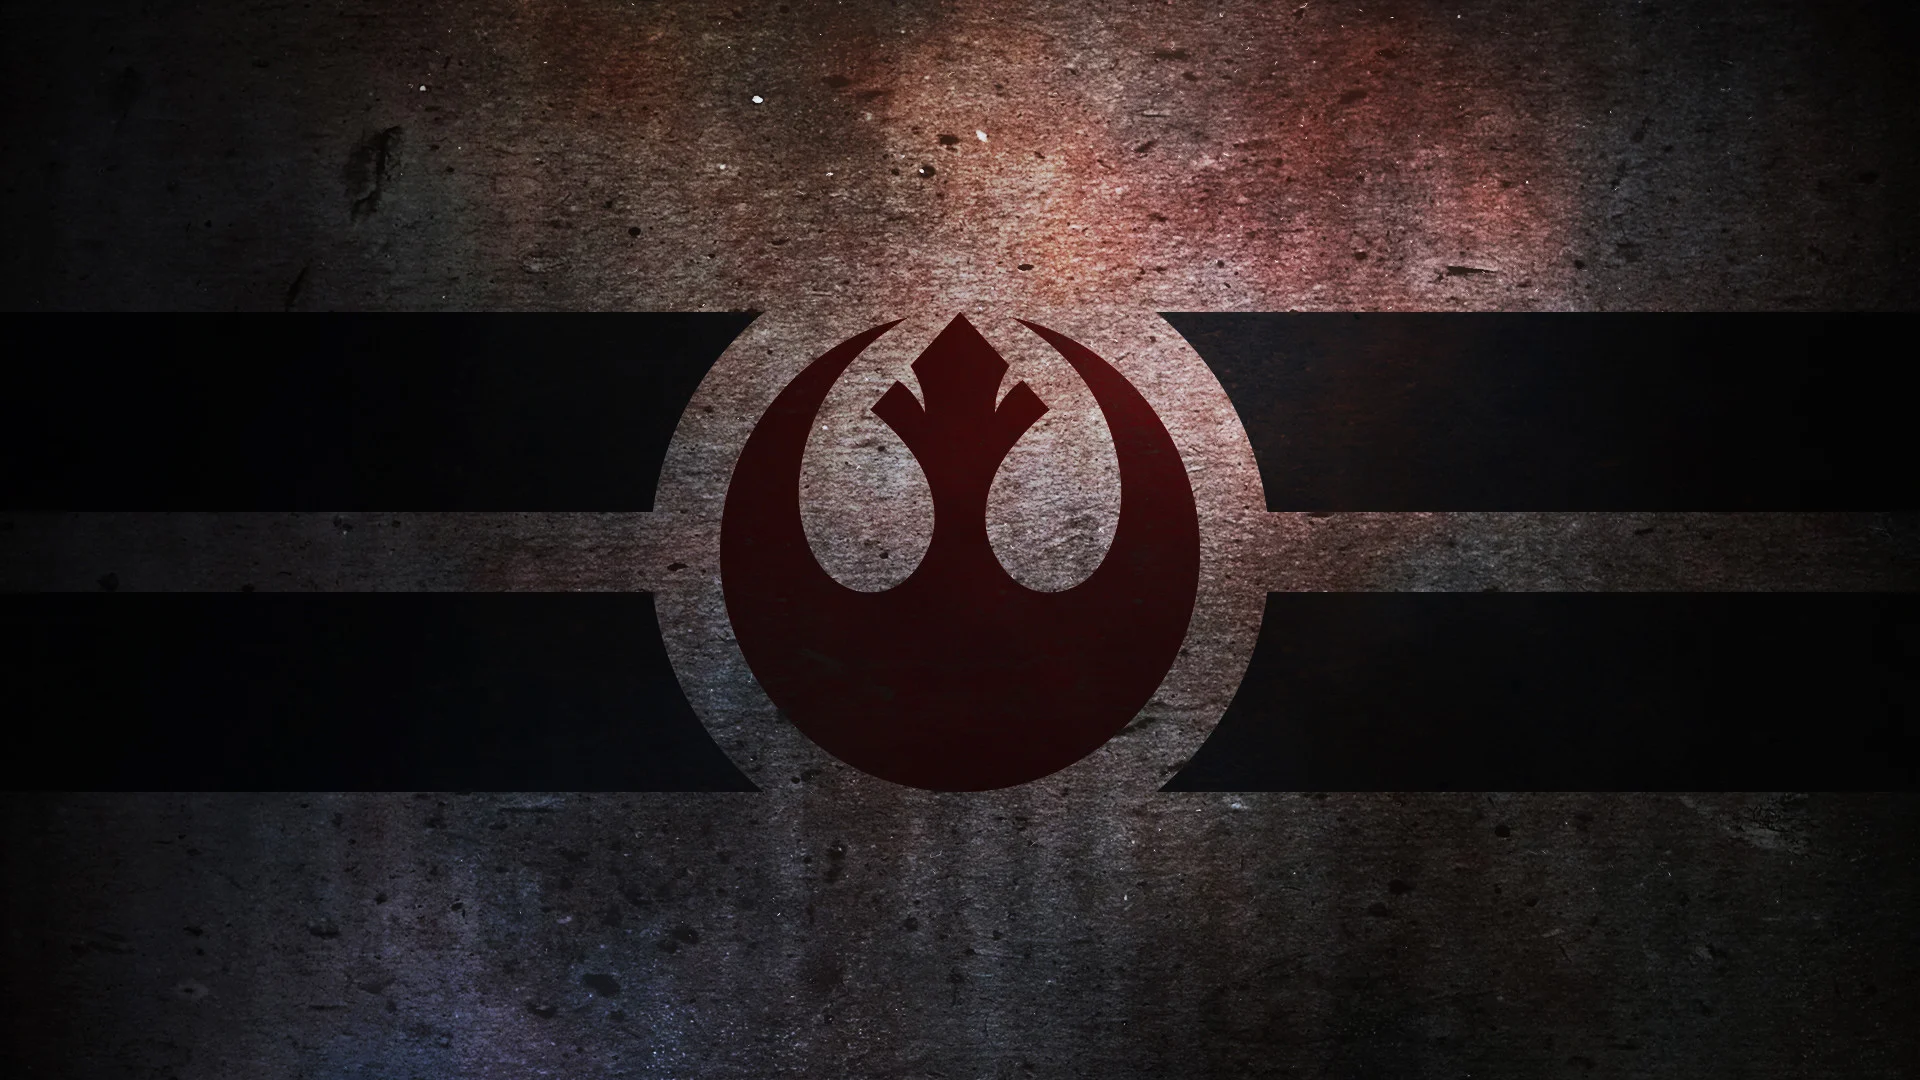 Star Wars Jedi Wallpapers For Iphone As Wallpaper HD